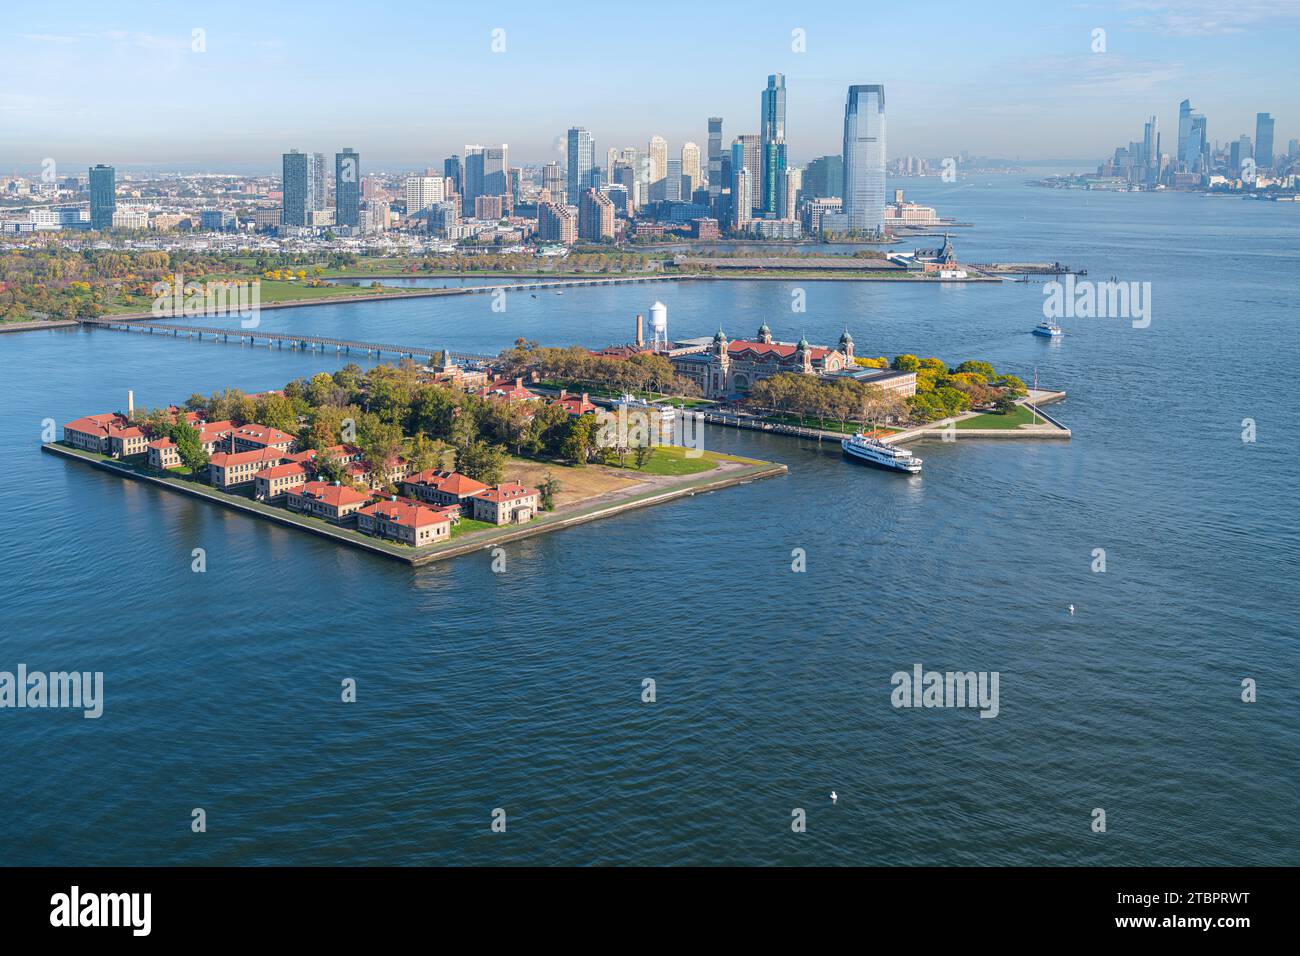 Ellis Island was an immigrants' entry point and processing station from 1892 to 1954. Now a historic museum accessible by ferry. Stock Photo